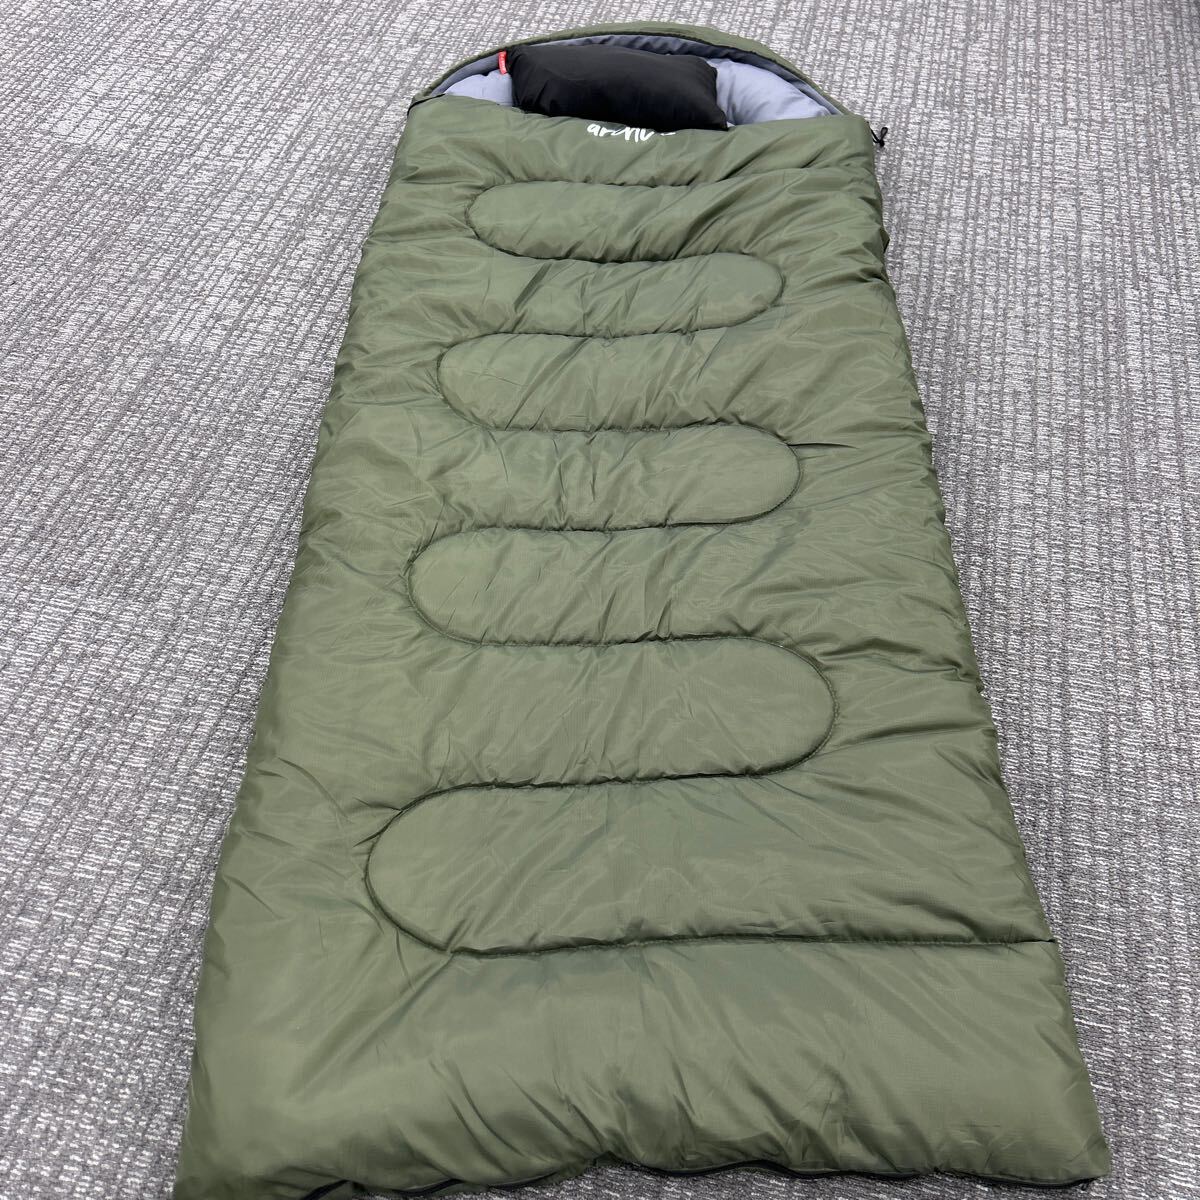  sleeping bag pillow attaching sleeping bag wide size limit use temperature -15*C envelope type winter sleeping area in the vehicle camp 26